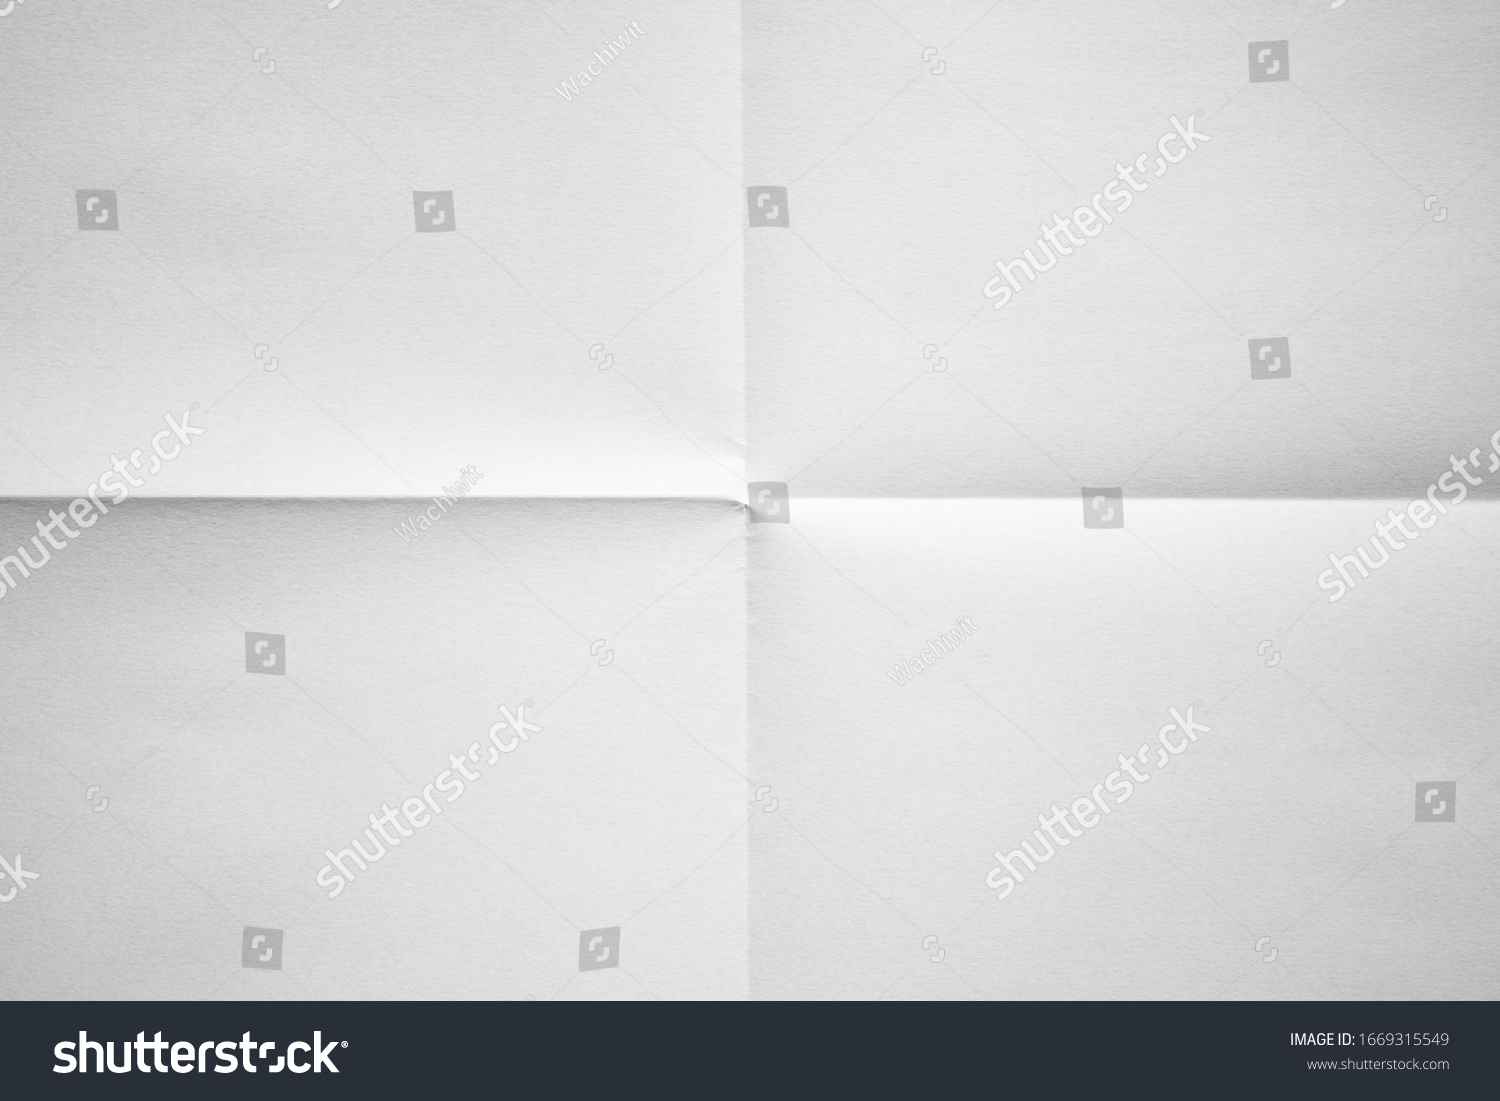 White paper folded in four fraction background #1669315549